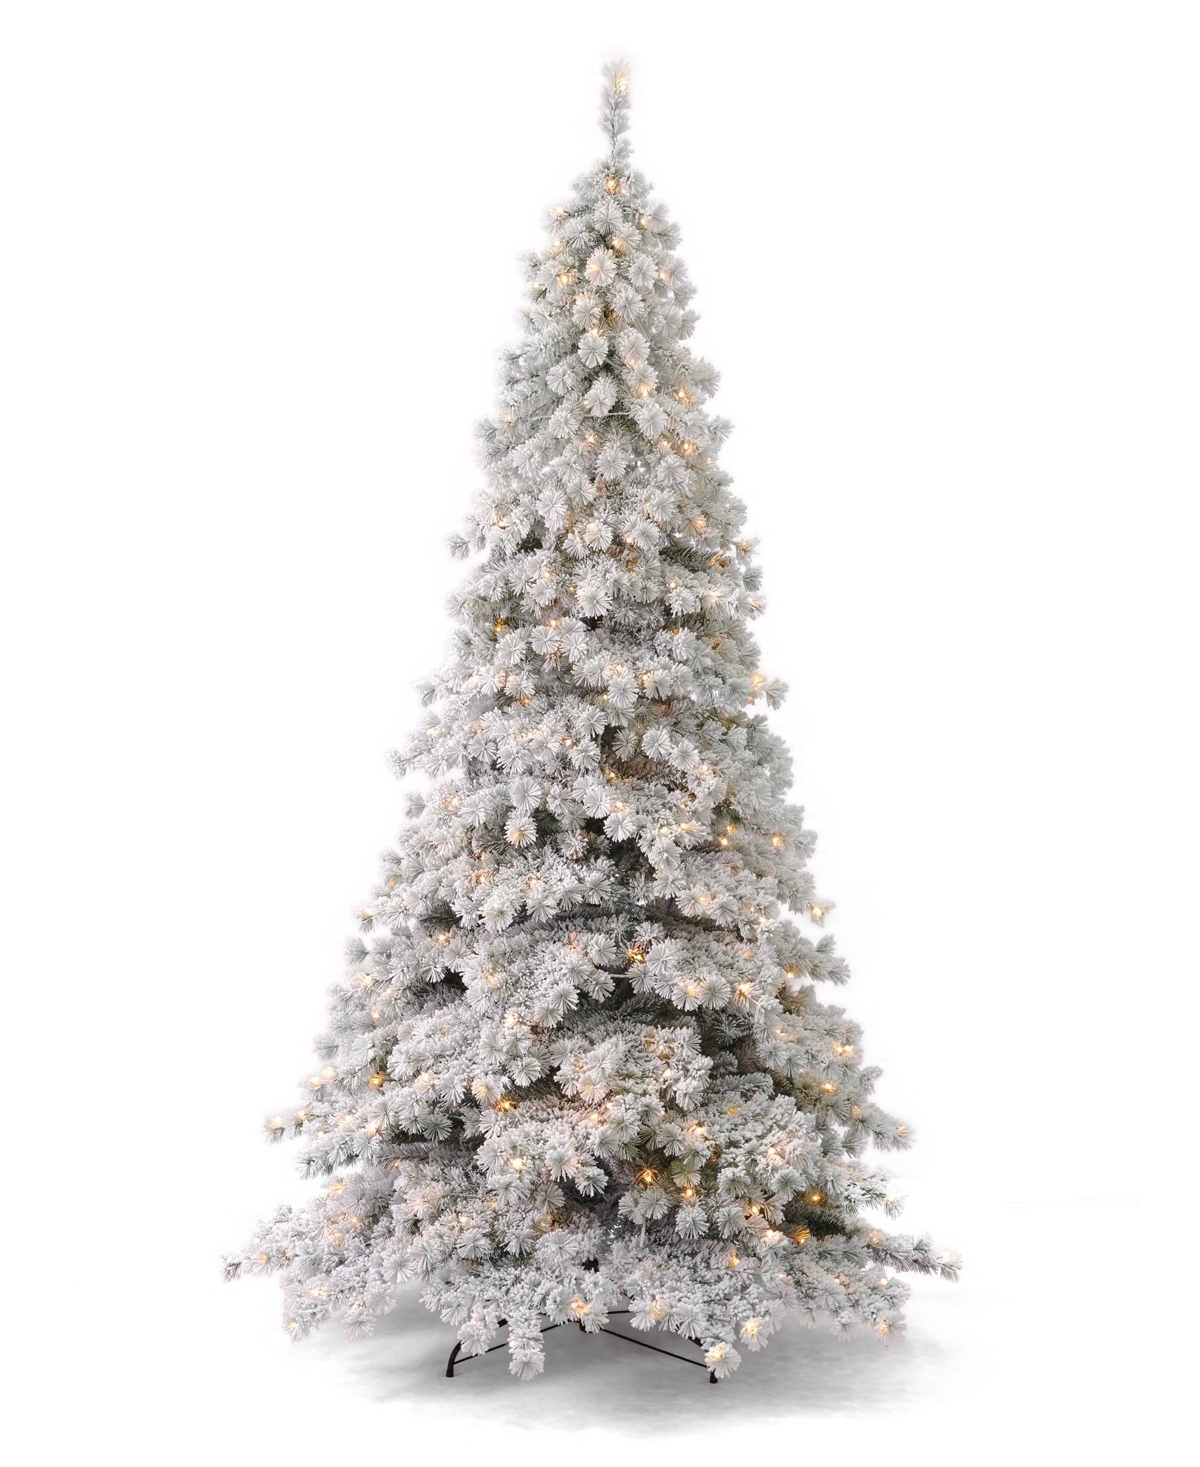 Flocked Winter Fir 9' Pre-Lit Flocked Hard Needle Tree with Metal Stand 1198 Tips, 400 Warm Led, Remote, Ez-Connect, Storage Bag - White